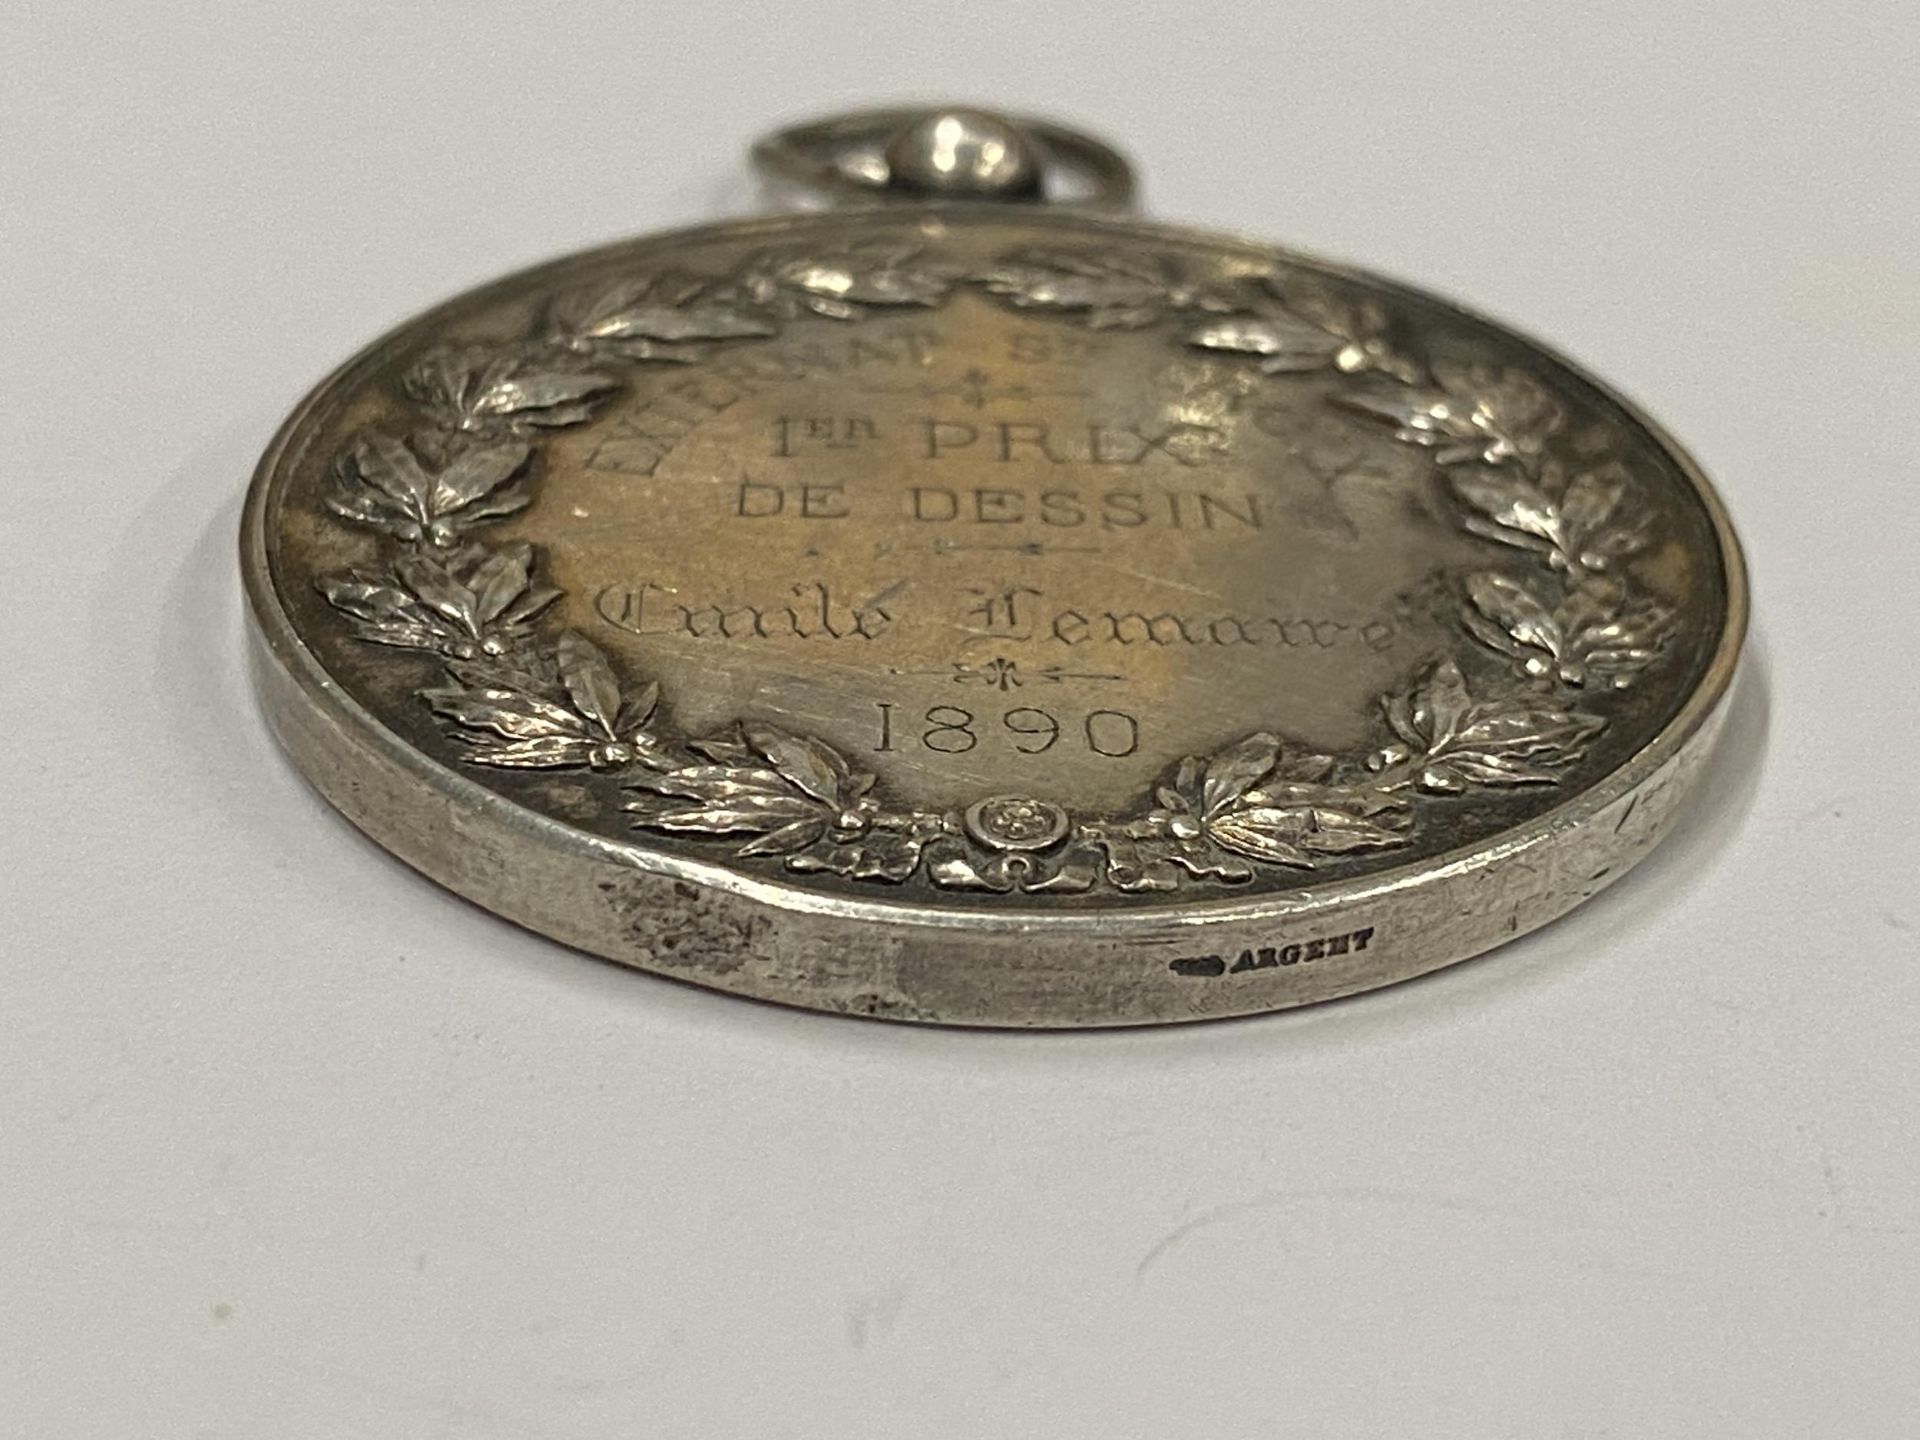 A 19TH CENTURY SILVER FRENCH 1ST PRIZE FOR DRAWING MEDAL FROM CAMBRAI CHRISTIAN SCHOOL, WEIGHT 52G - Image 2 of 3